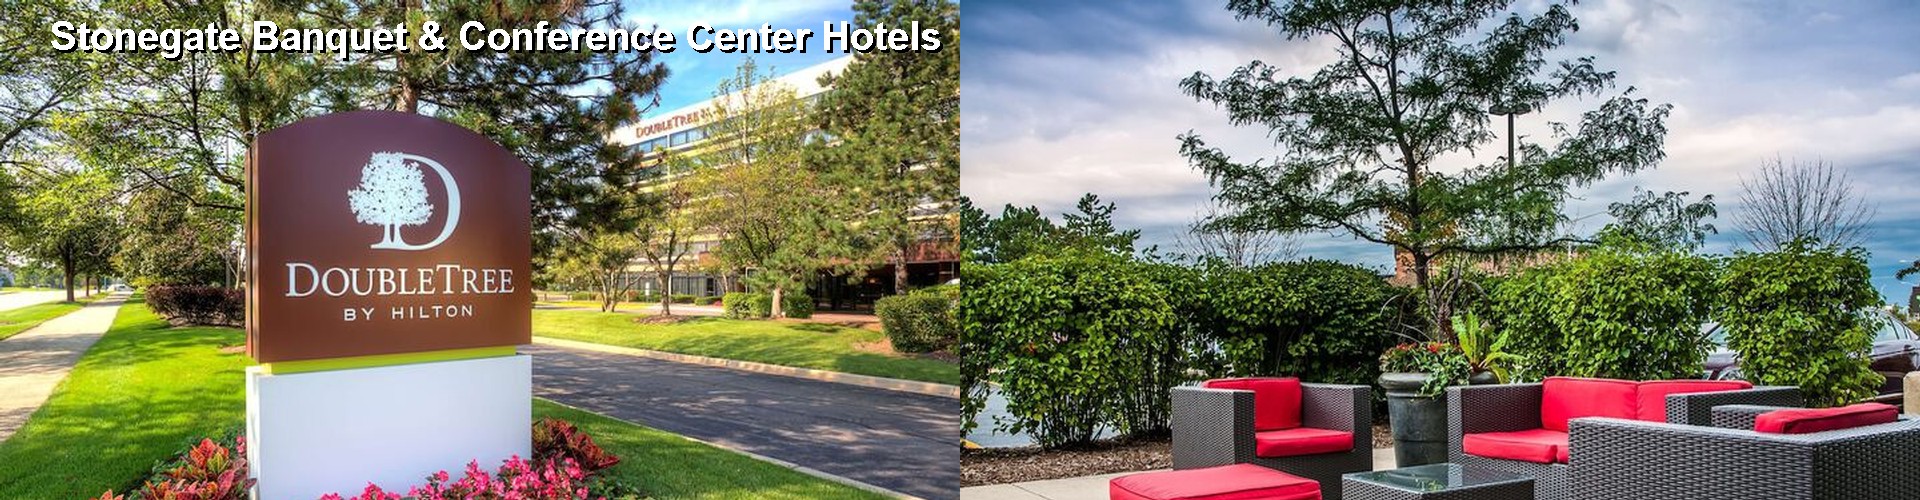 5 Best Hotels near Stonegate Banquet & Conference Center